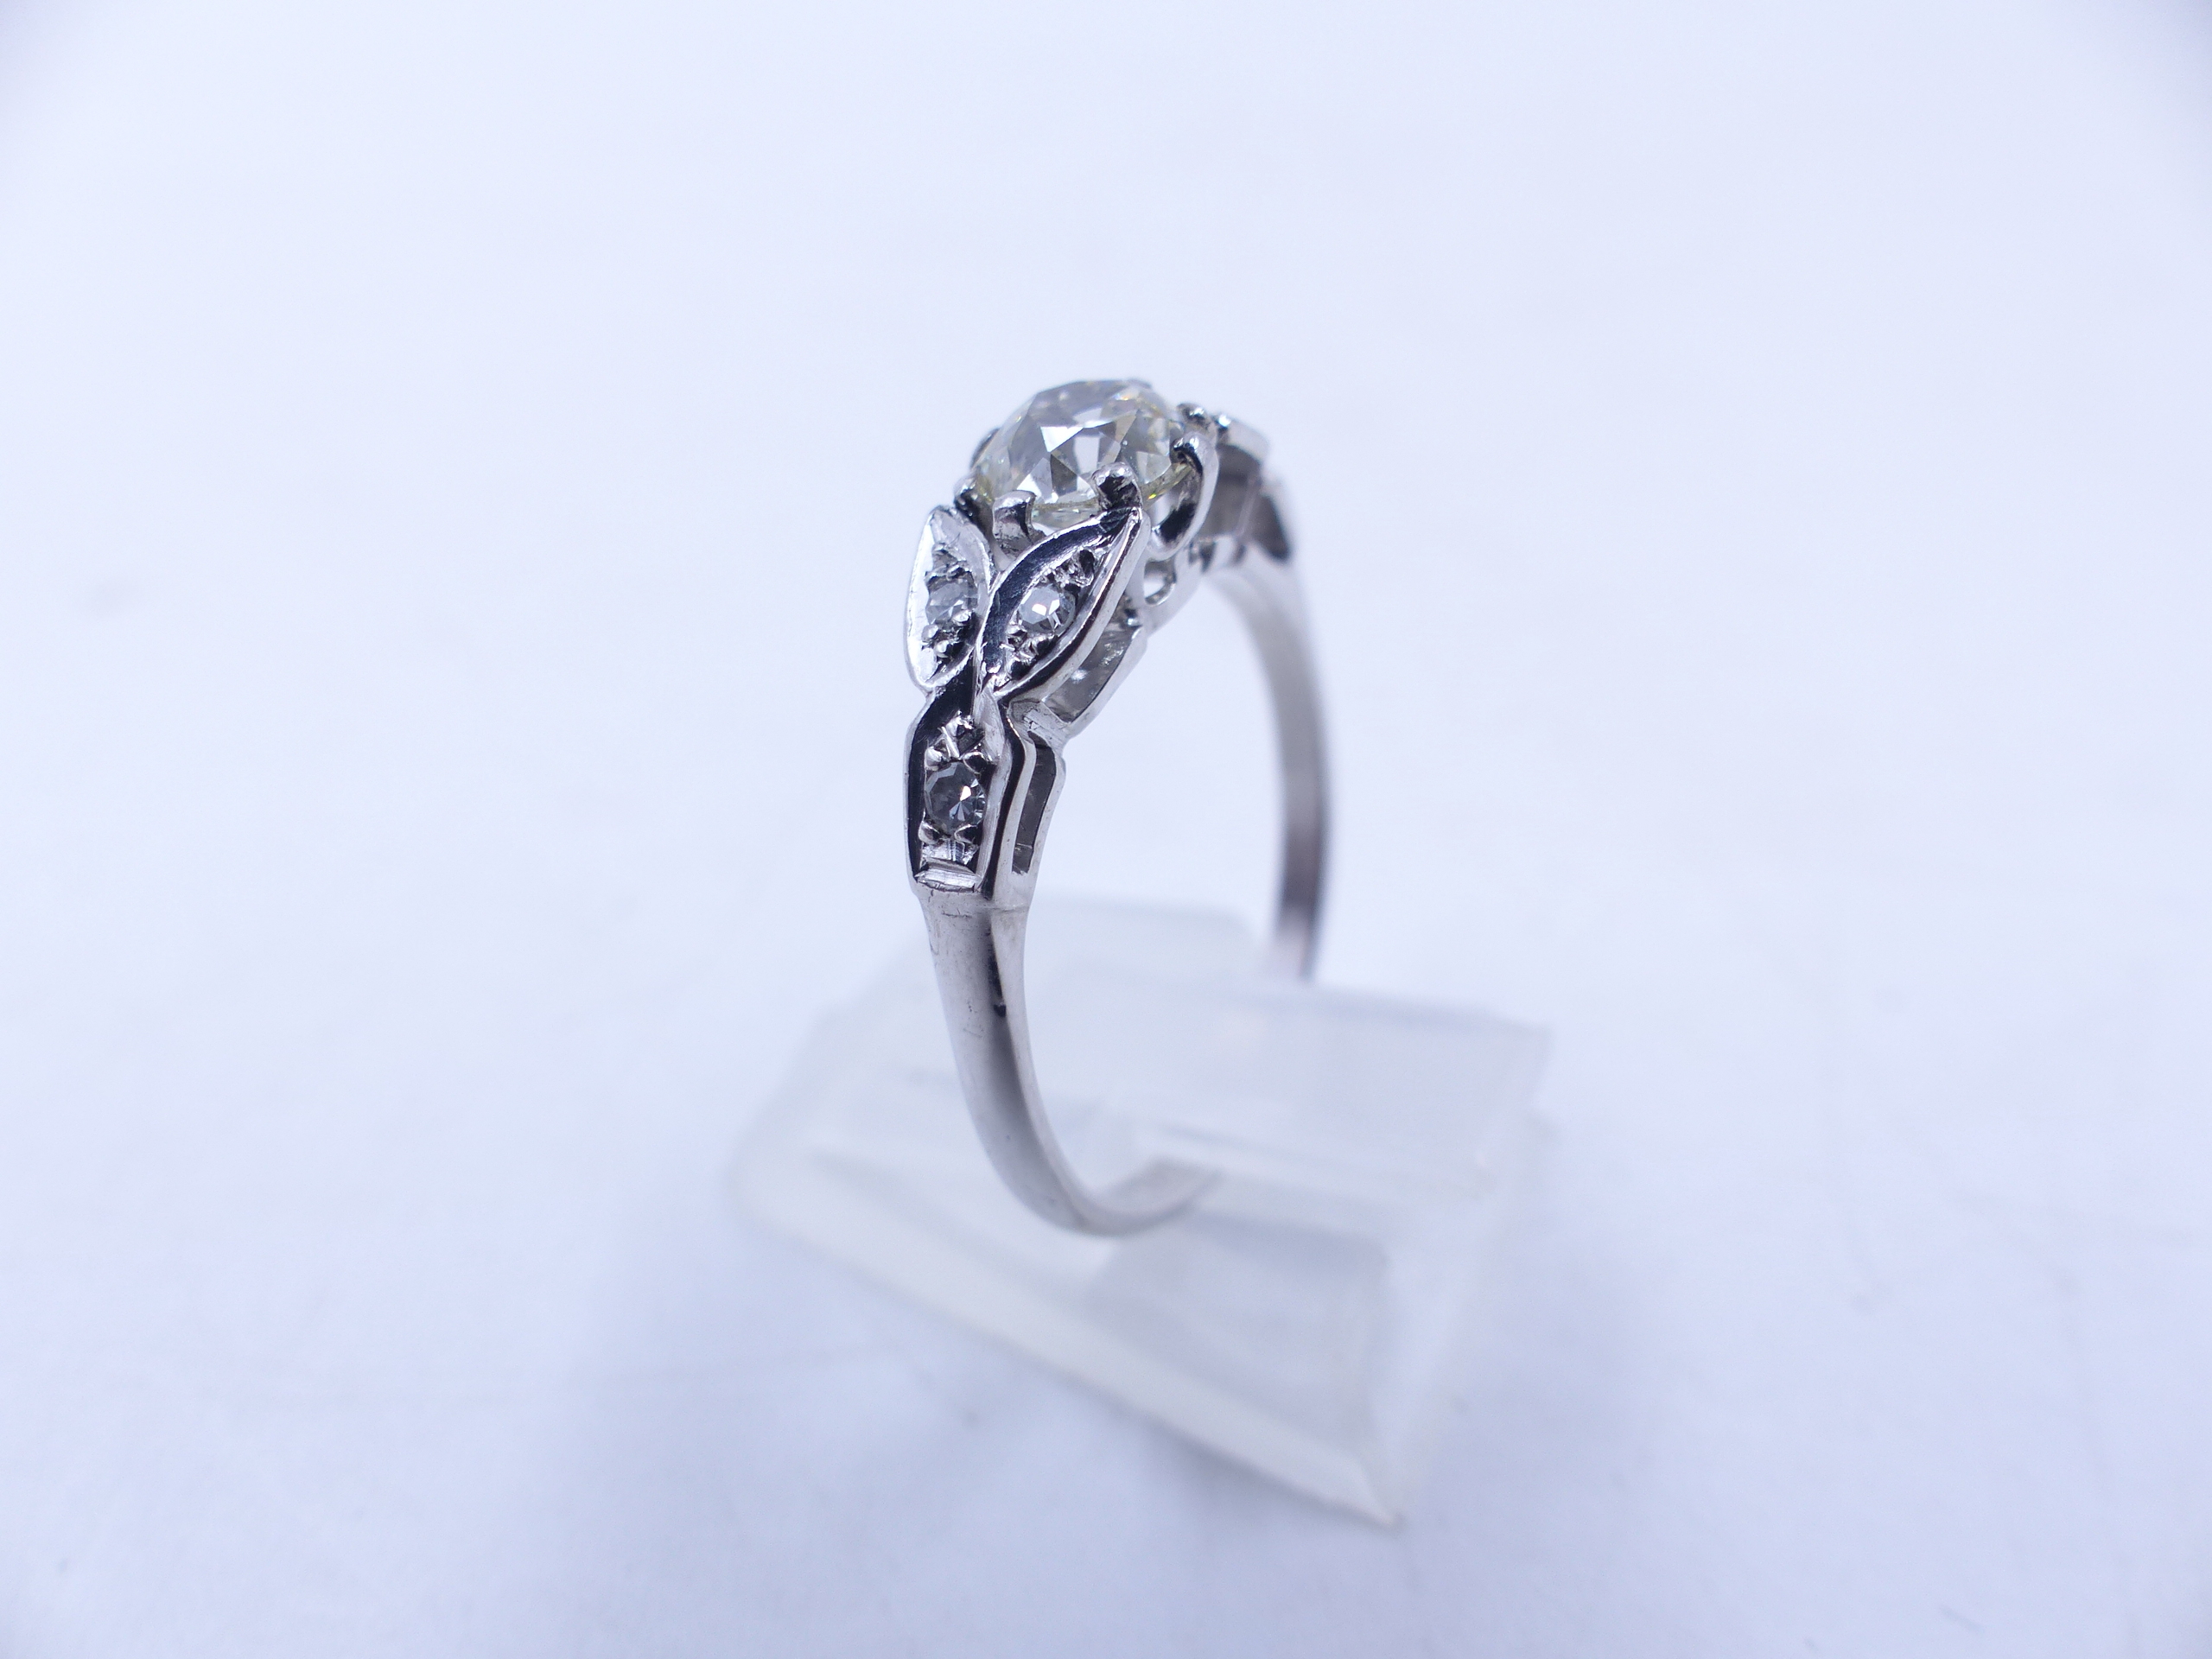 AN 18ct STAMPED OLD CUT DIAMOND RING. THE CENTRAL OLD CUT DIAMOND IS HELD IN AN EIGHT CLAW SETTING - Image 8 of 14